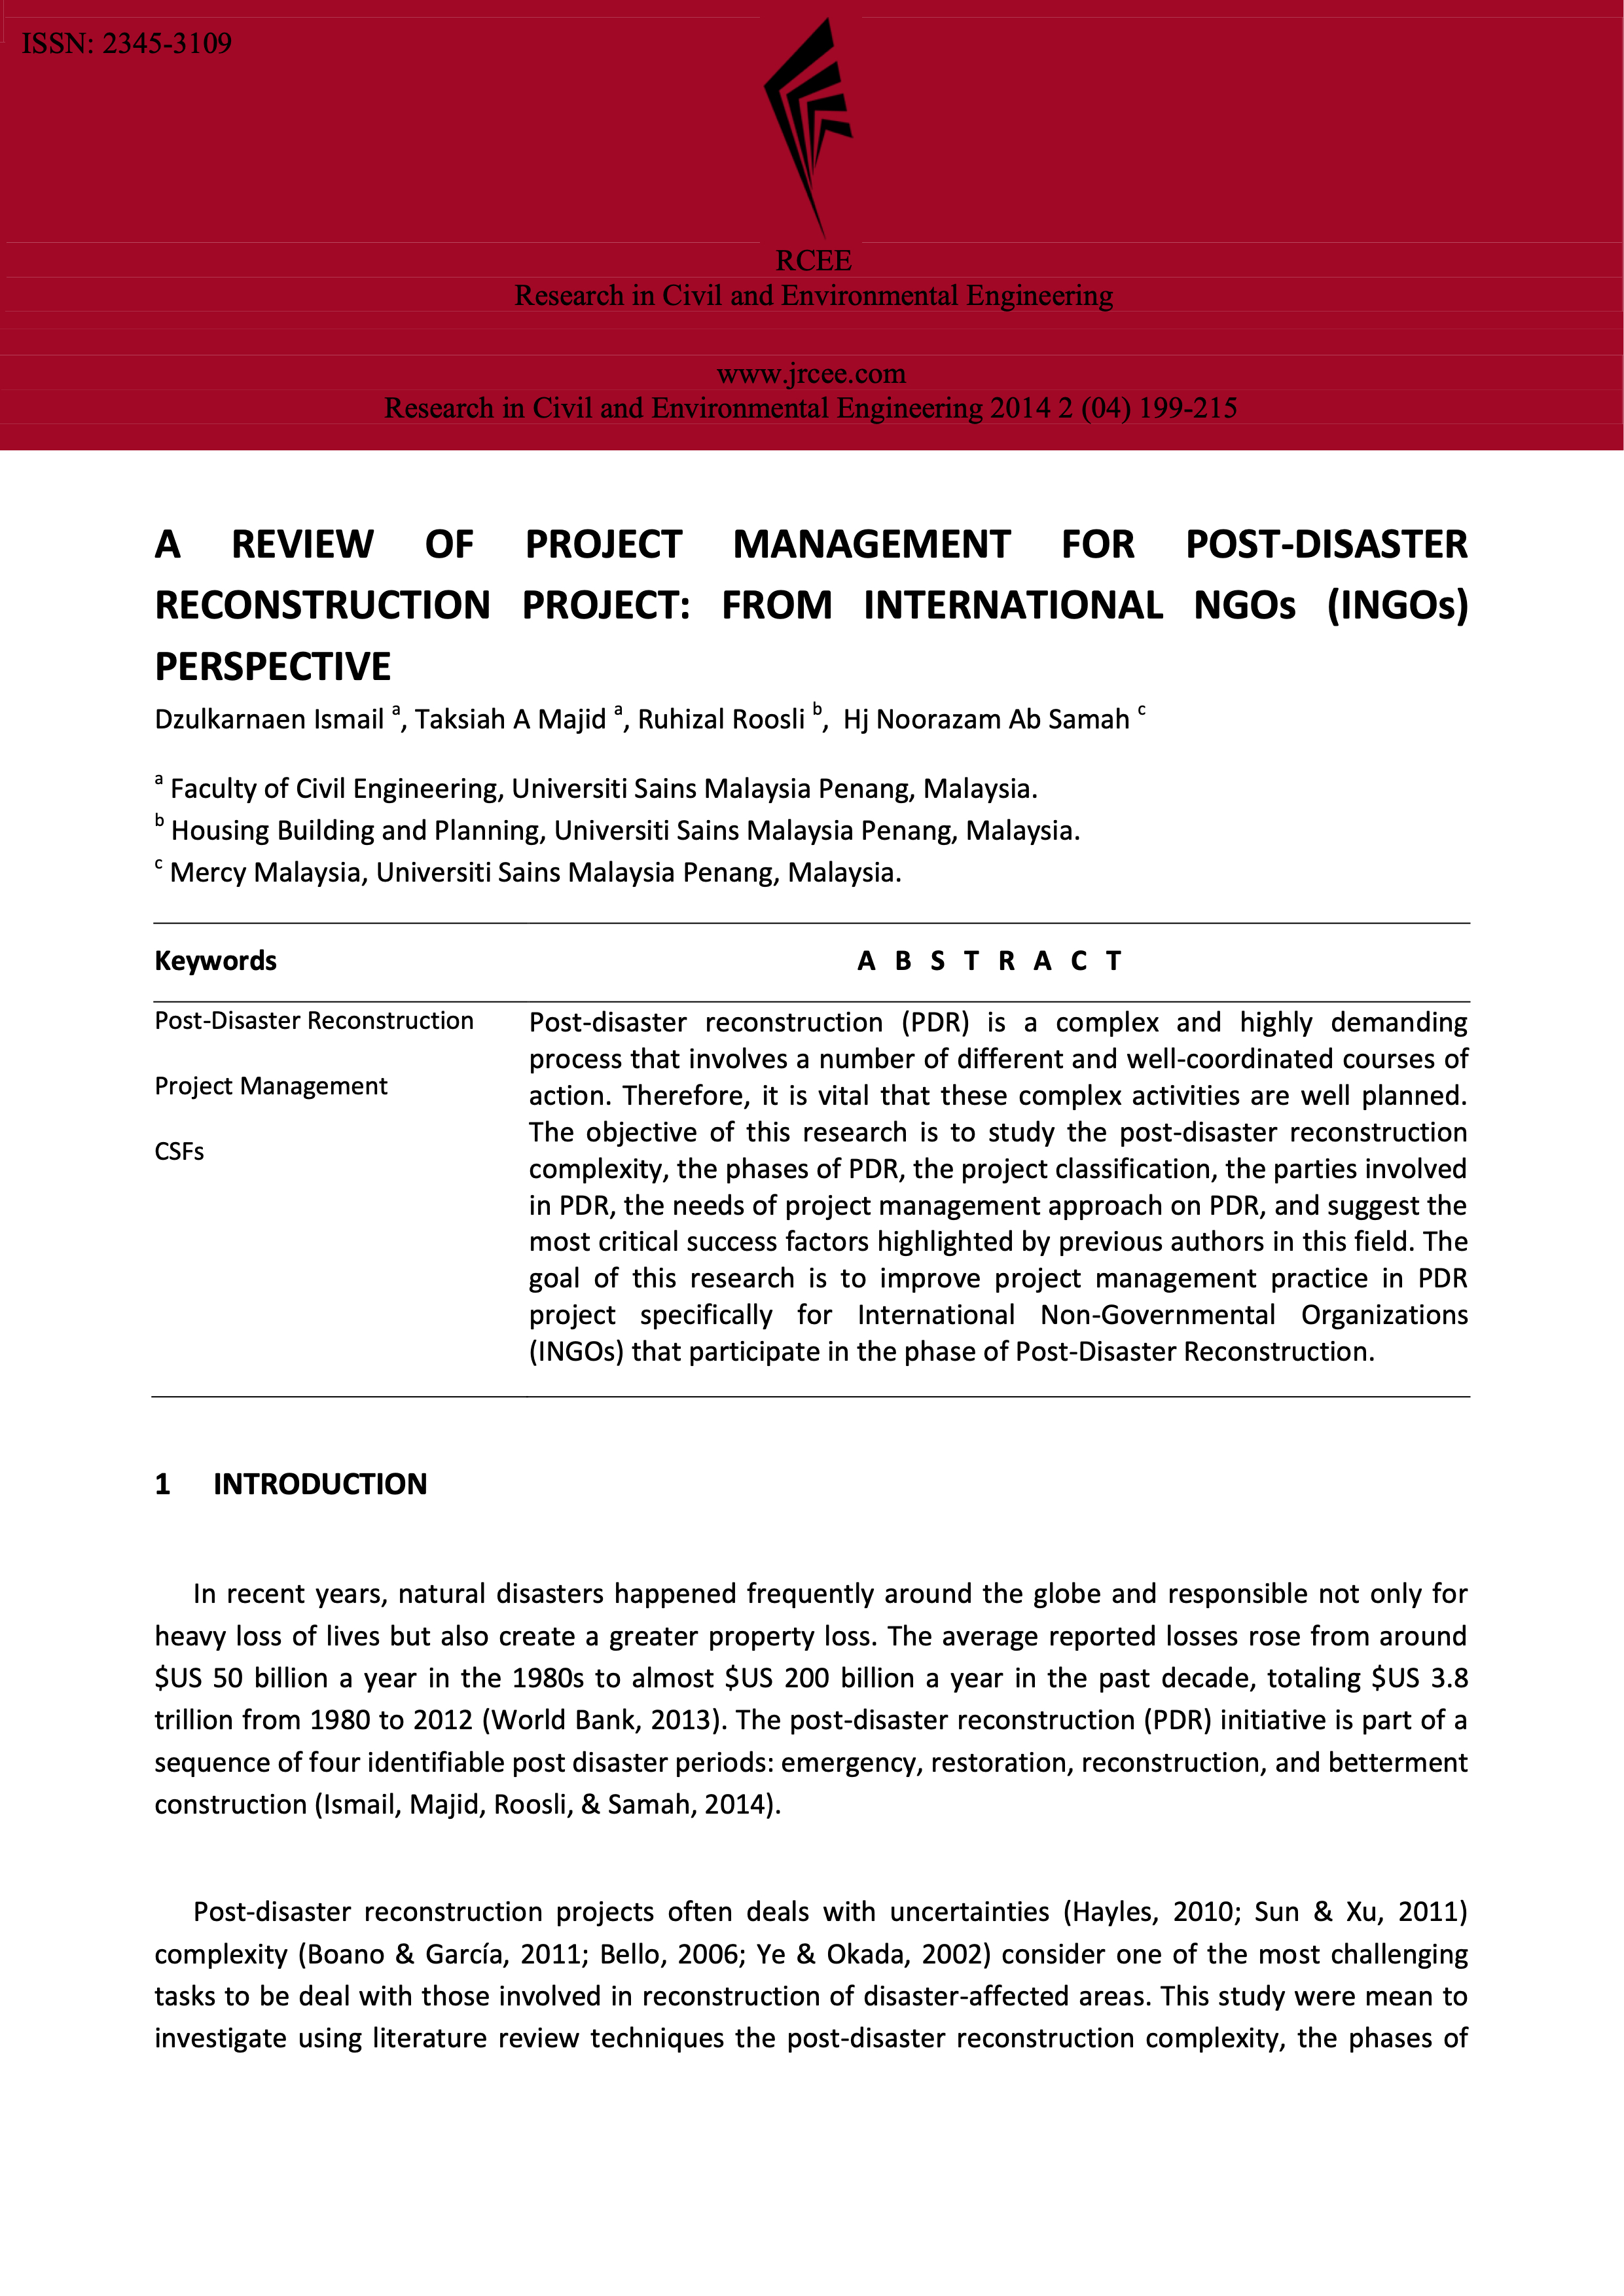 A review of project management for post-disaster reconstruction project